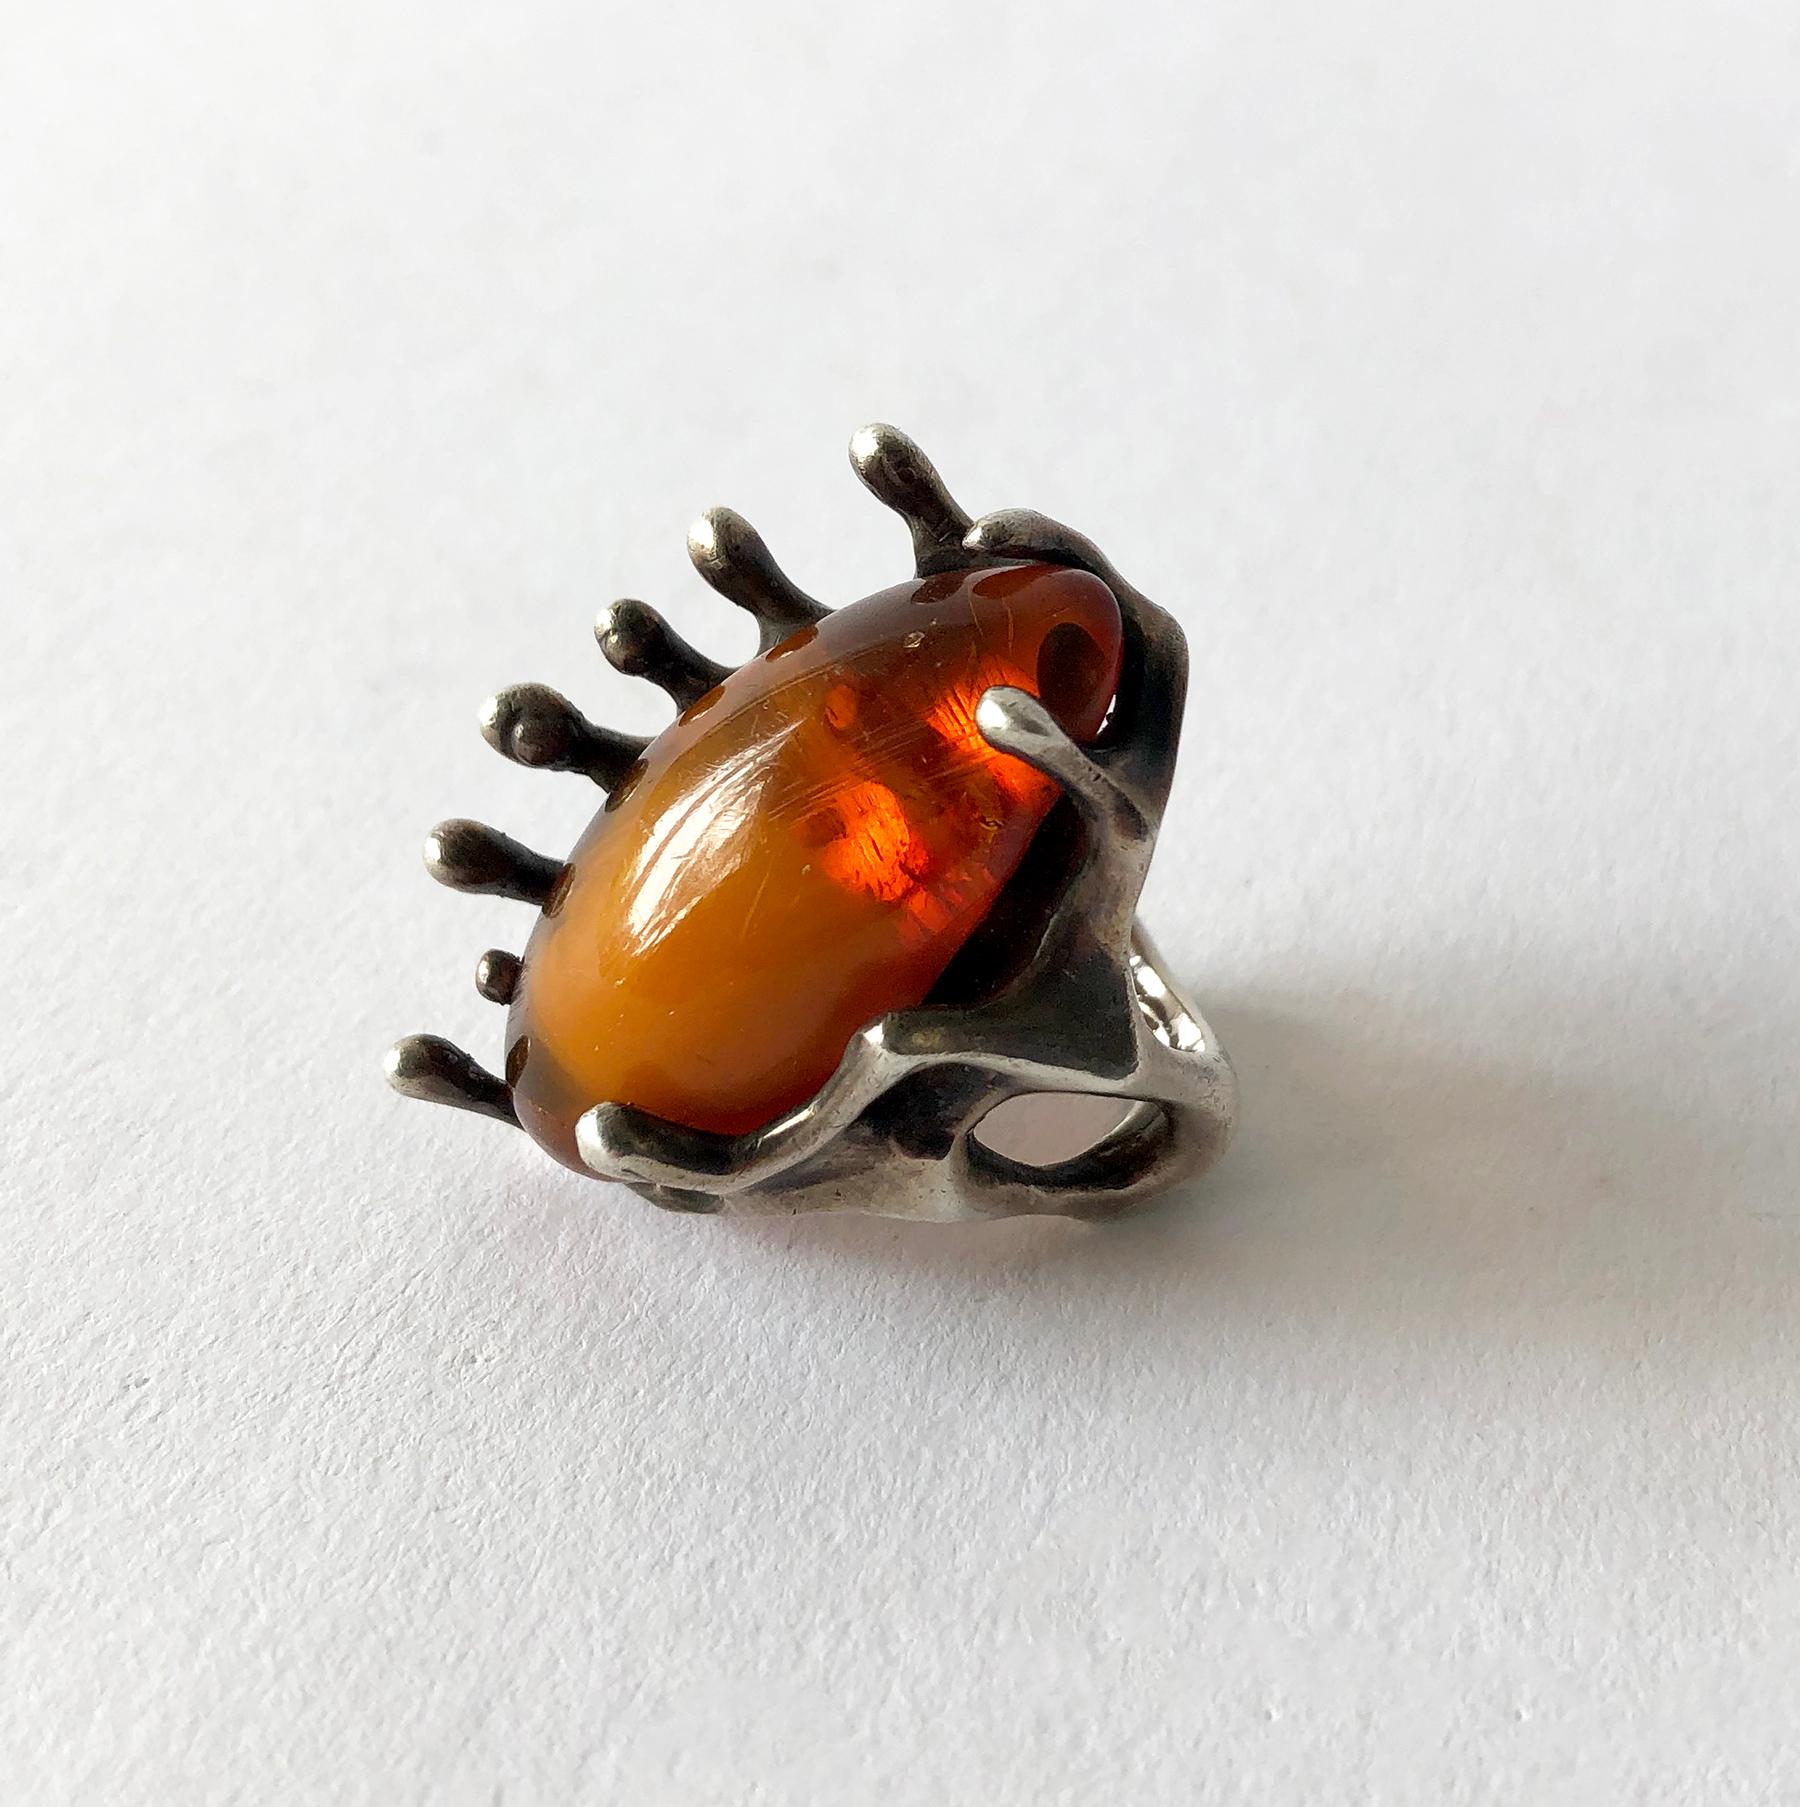 Large oval amber cabochon set in a brutalist setting of sterling silver made by John M. Morgan of Ellensburg, Washington. Ring is a finger size 7.5 - 8 due to its unusual design. The face of the ring measures about 1.5